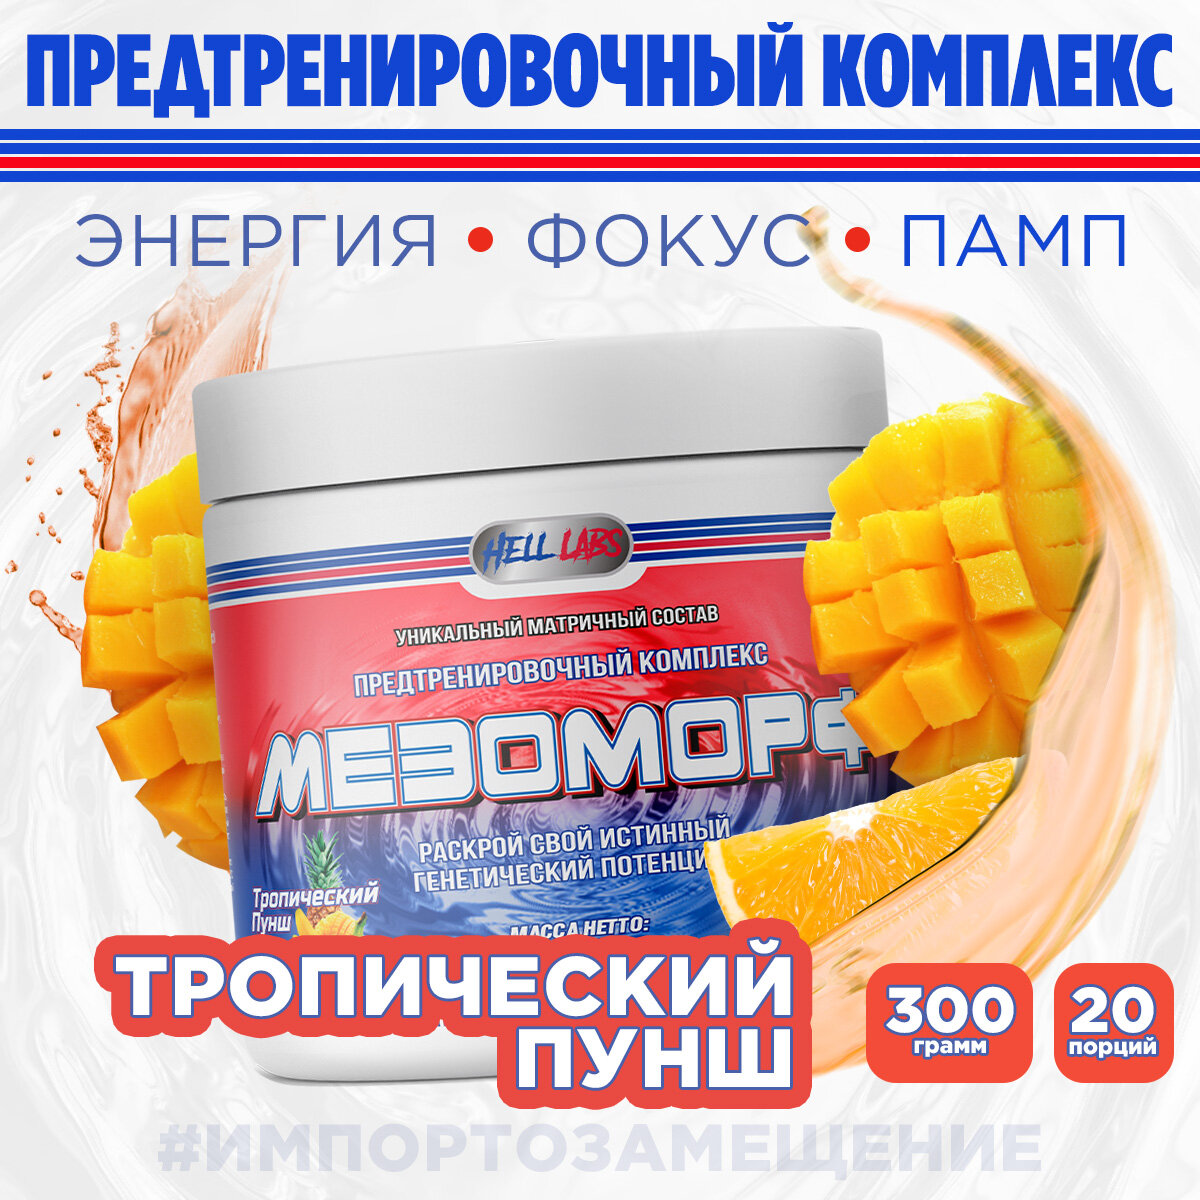 Hell Labs MESOMORPH 300g (Tropical Punch)